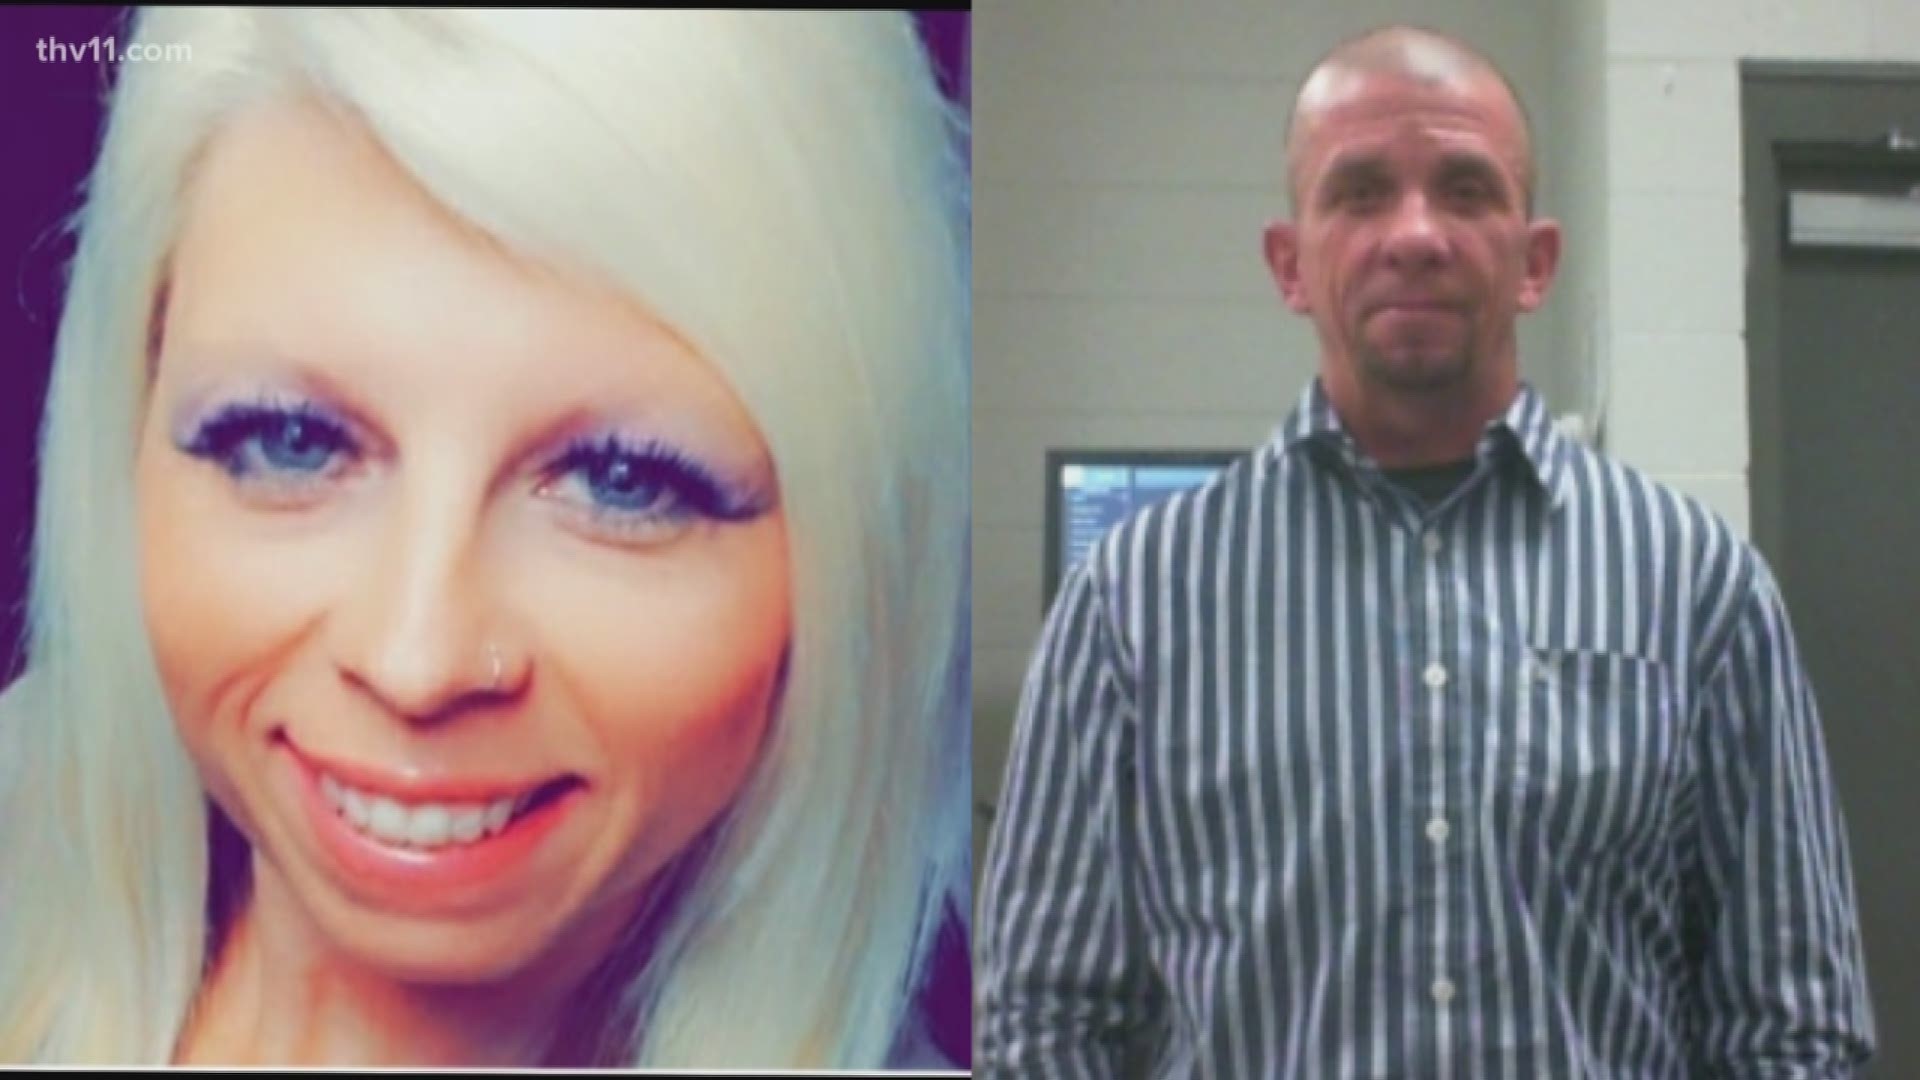 Human remains have been identified as a woman missing from Wynne. And her boyfriend is now charged with Captial Murder.